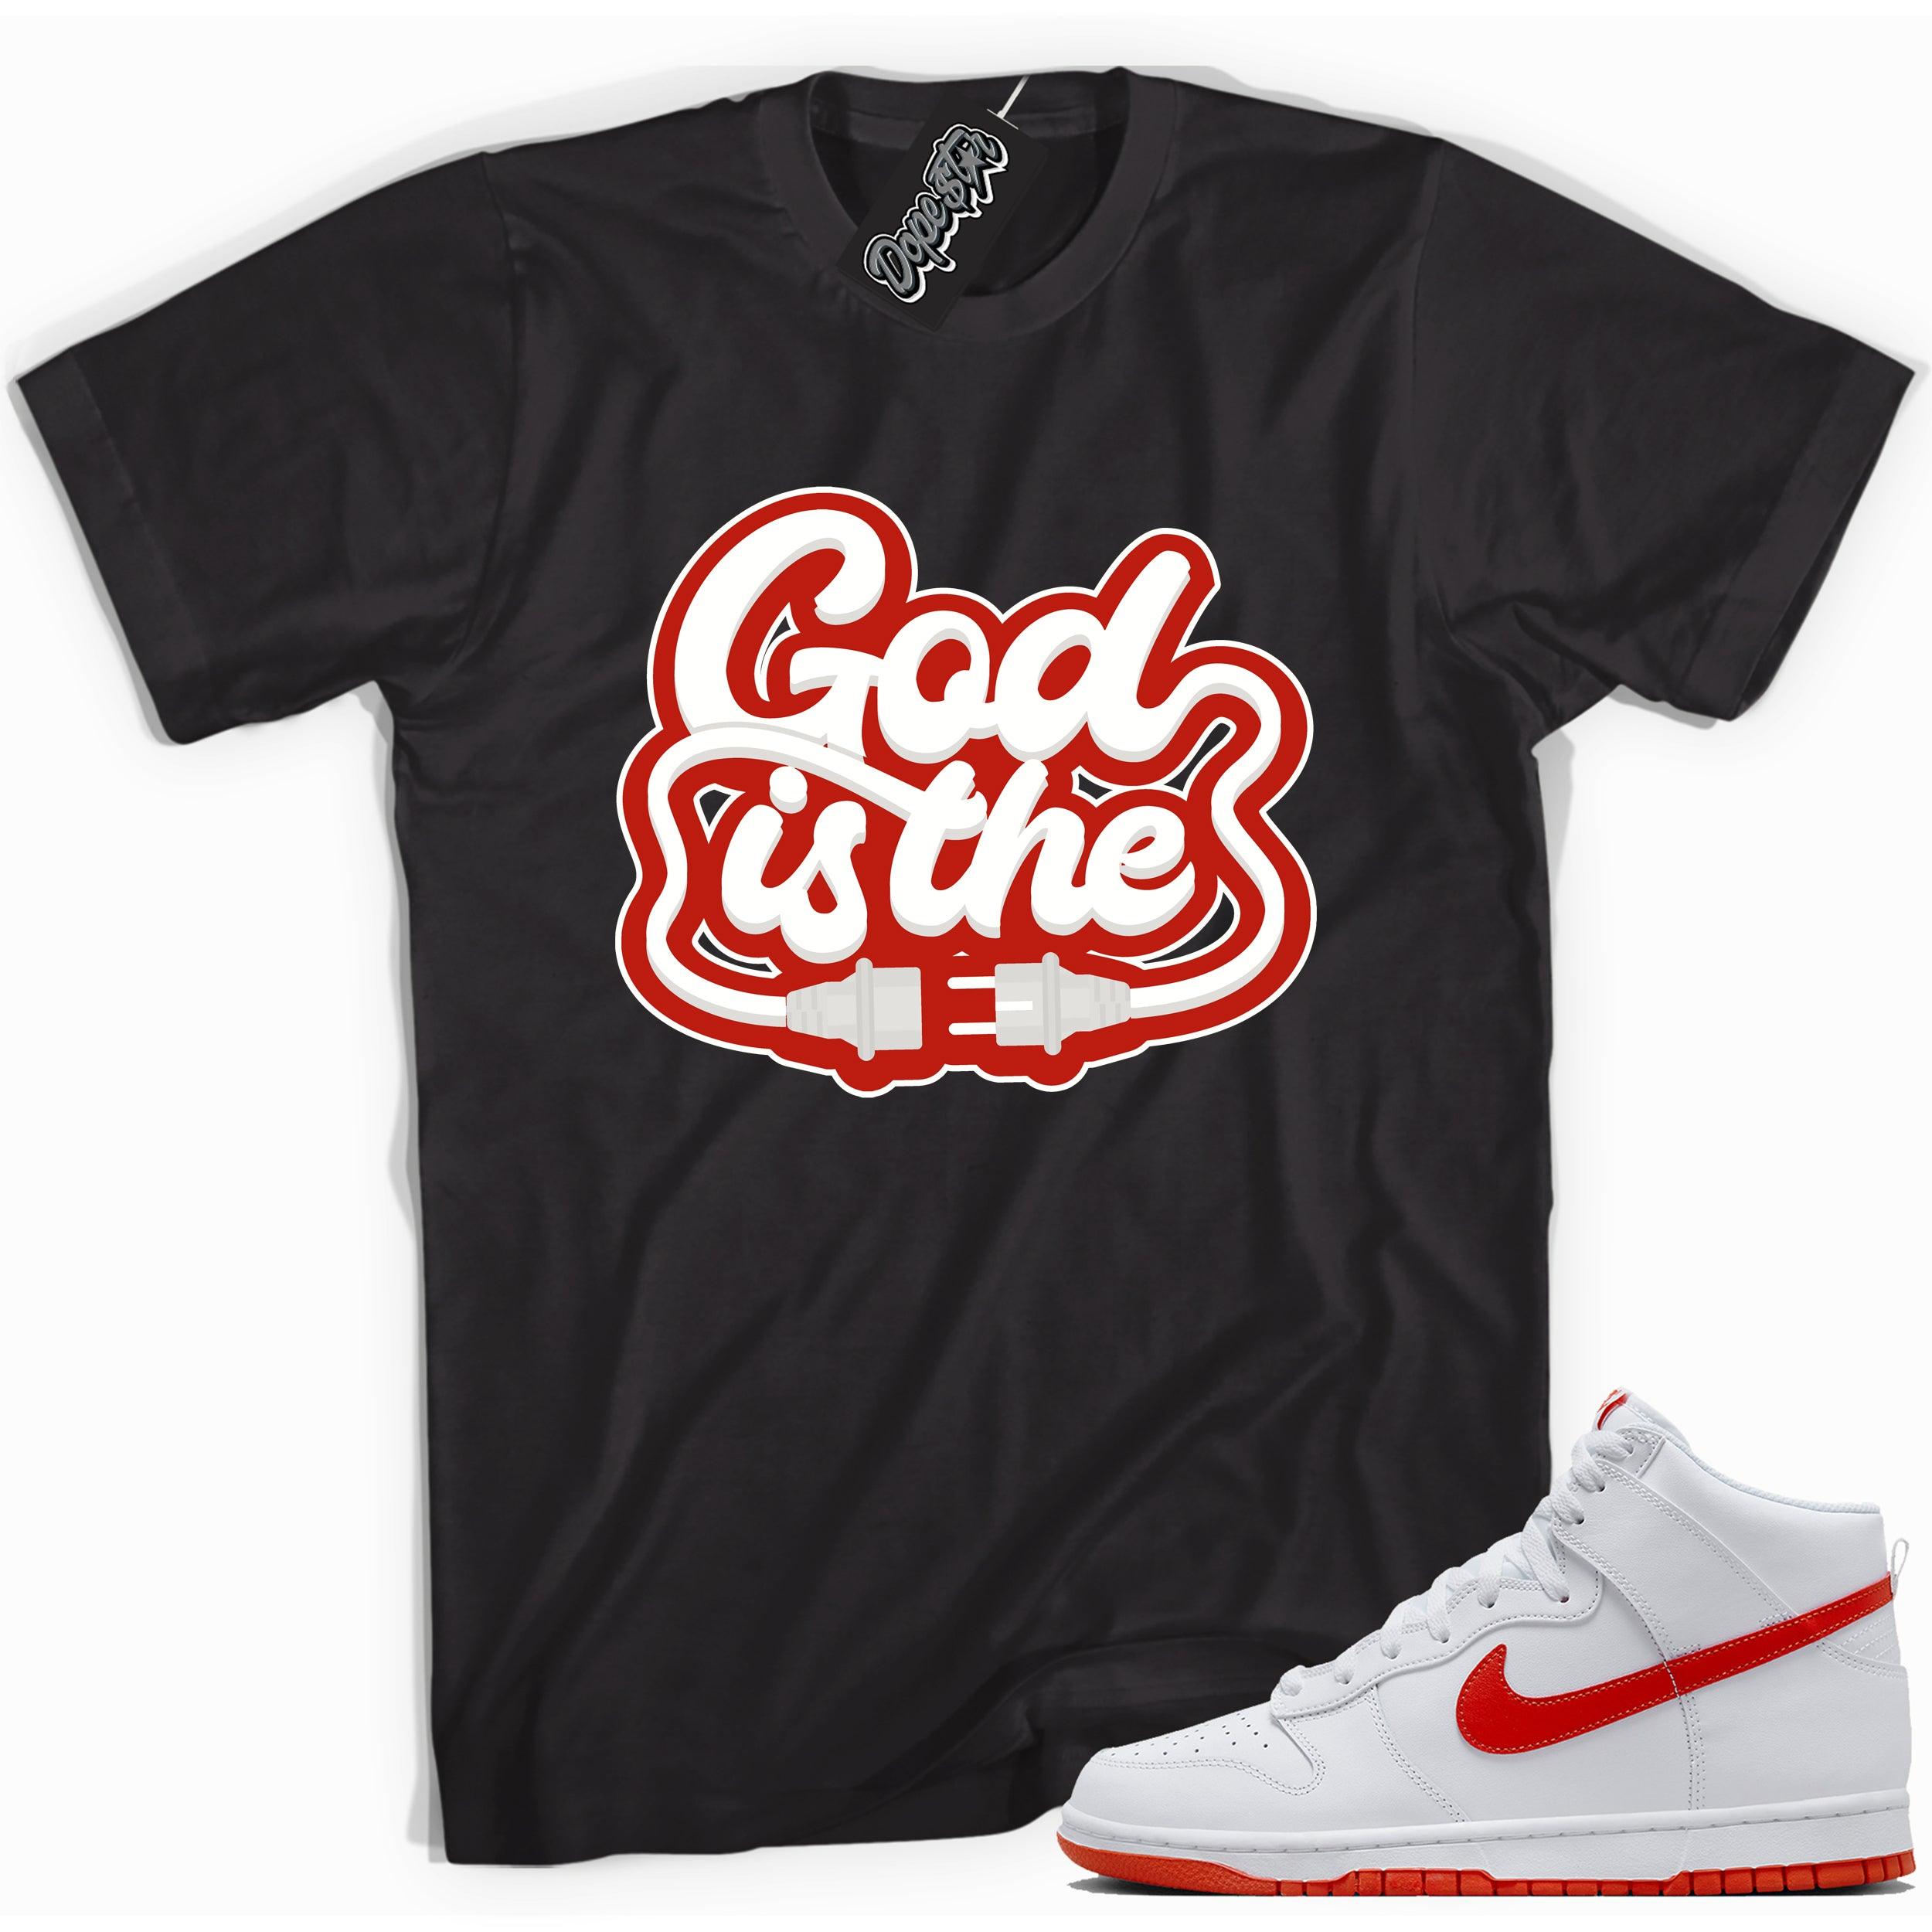 Cool black graphic tee with 'god is the plug' print, that perfectly matches Nike Dunk High White Picante Red sneakers.